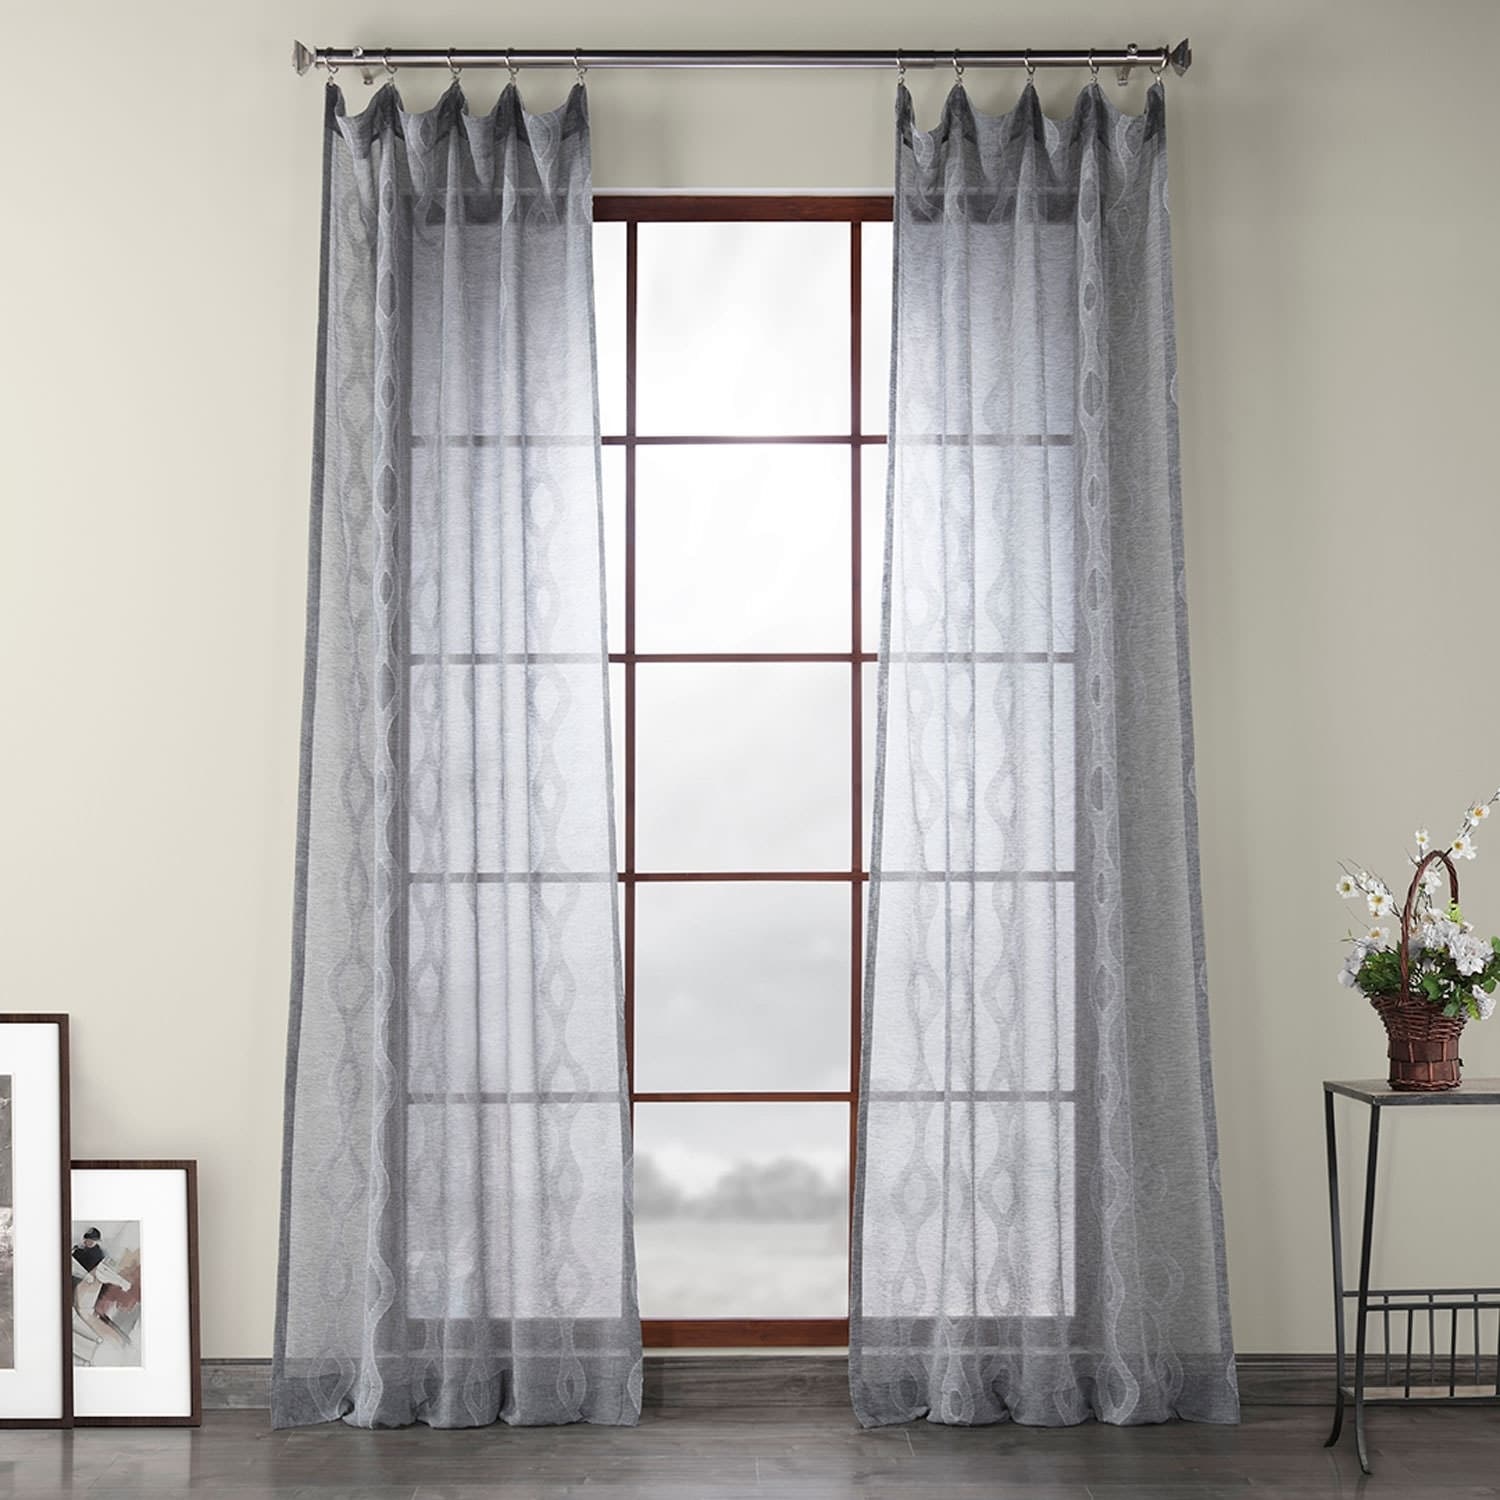 Elegant Bedroom Coffee Shade Cloth Drapes Embroidered Sheer Curtain 84/96" Tulle 